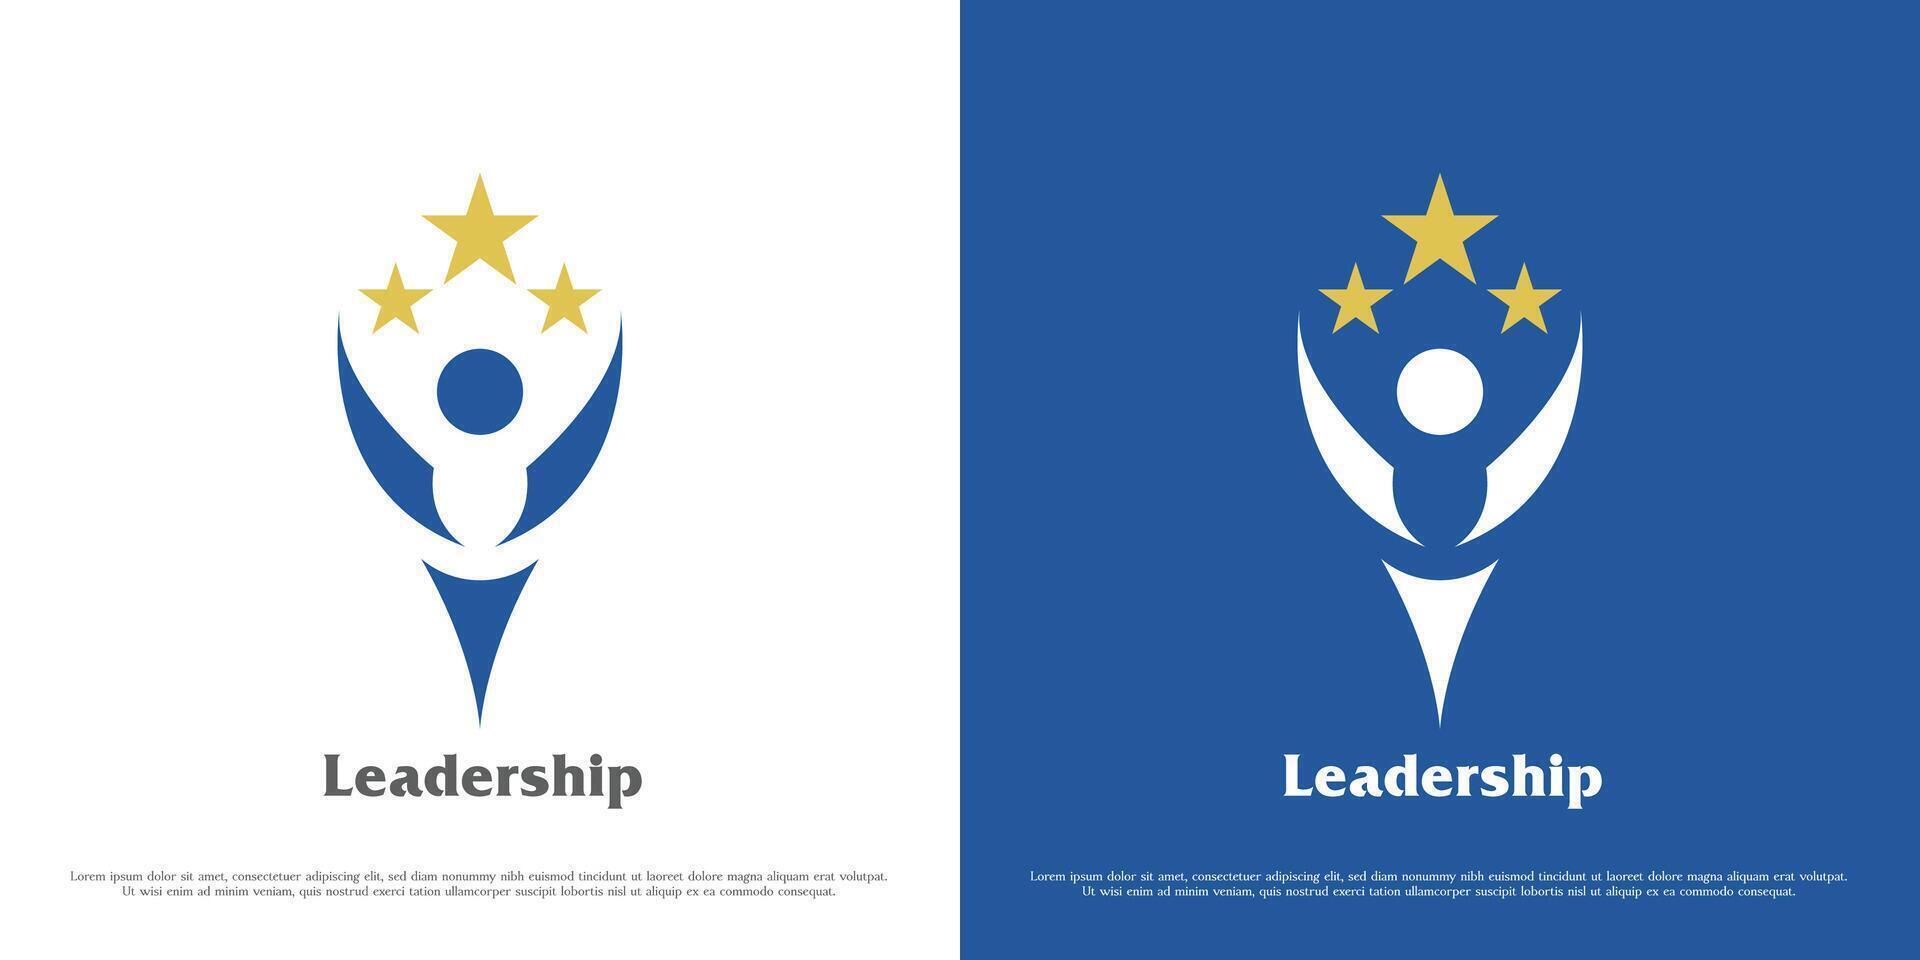 Work leadership logo design illustration. Silhouettes people person worker boss supervisor manager founder success employer company office staff. Star business simple minimal abstract icon symbol. vector